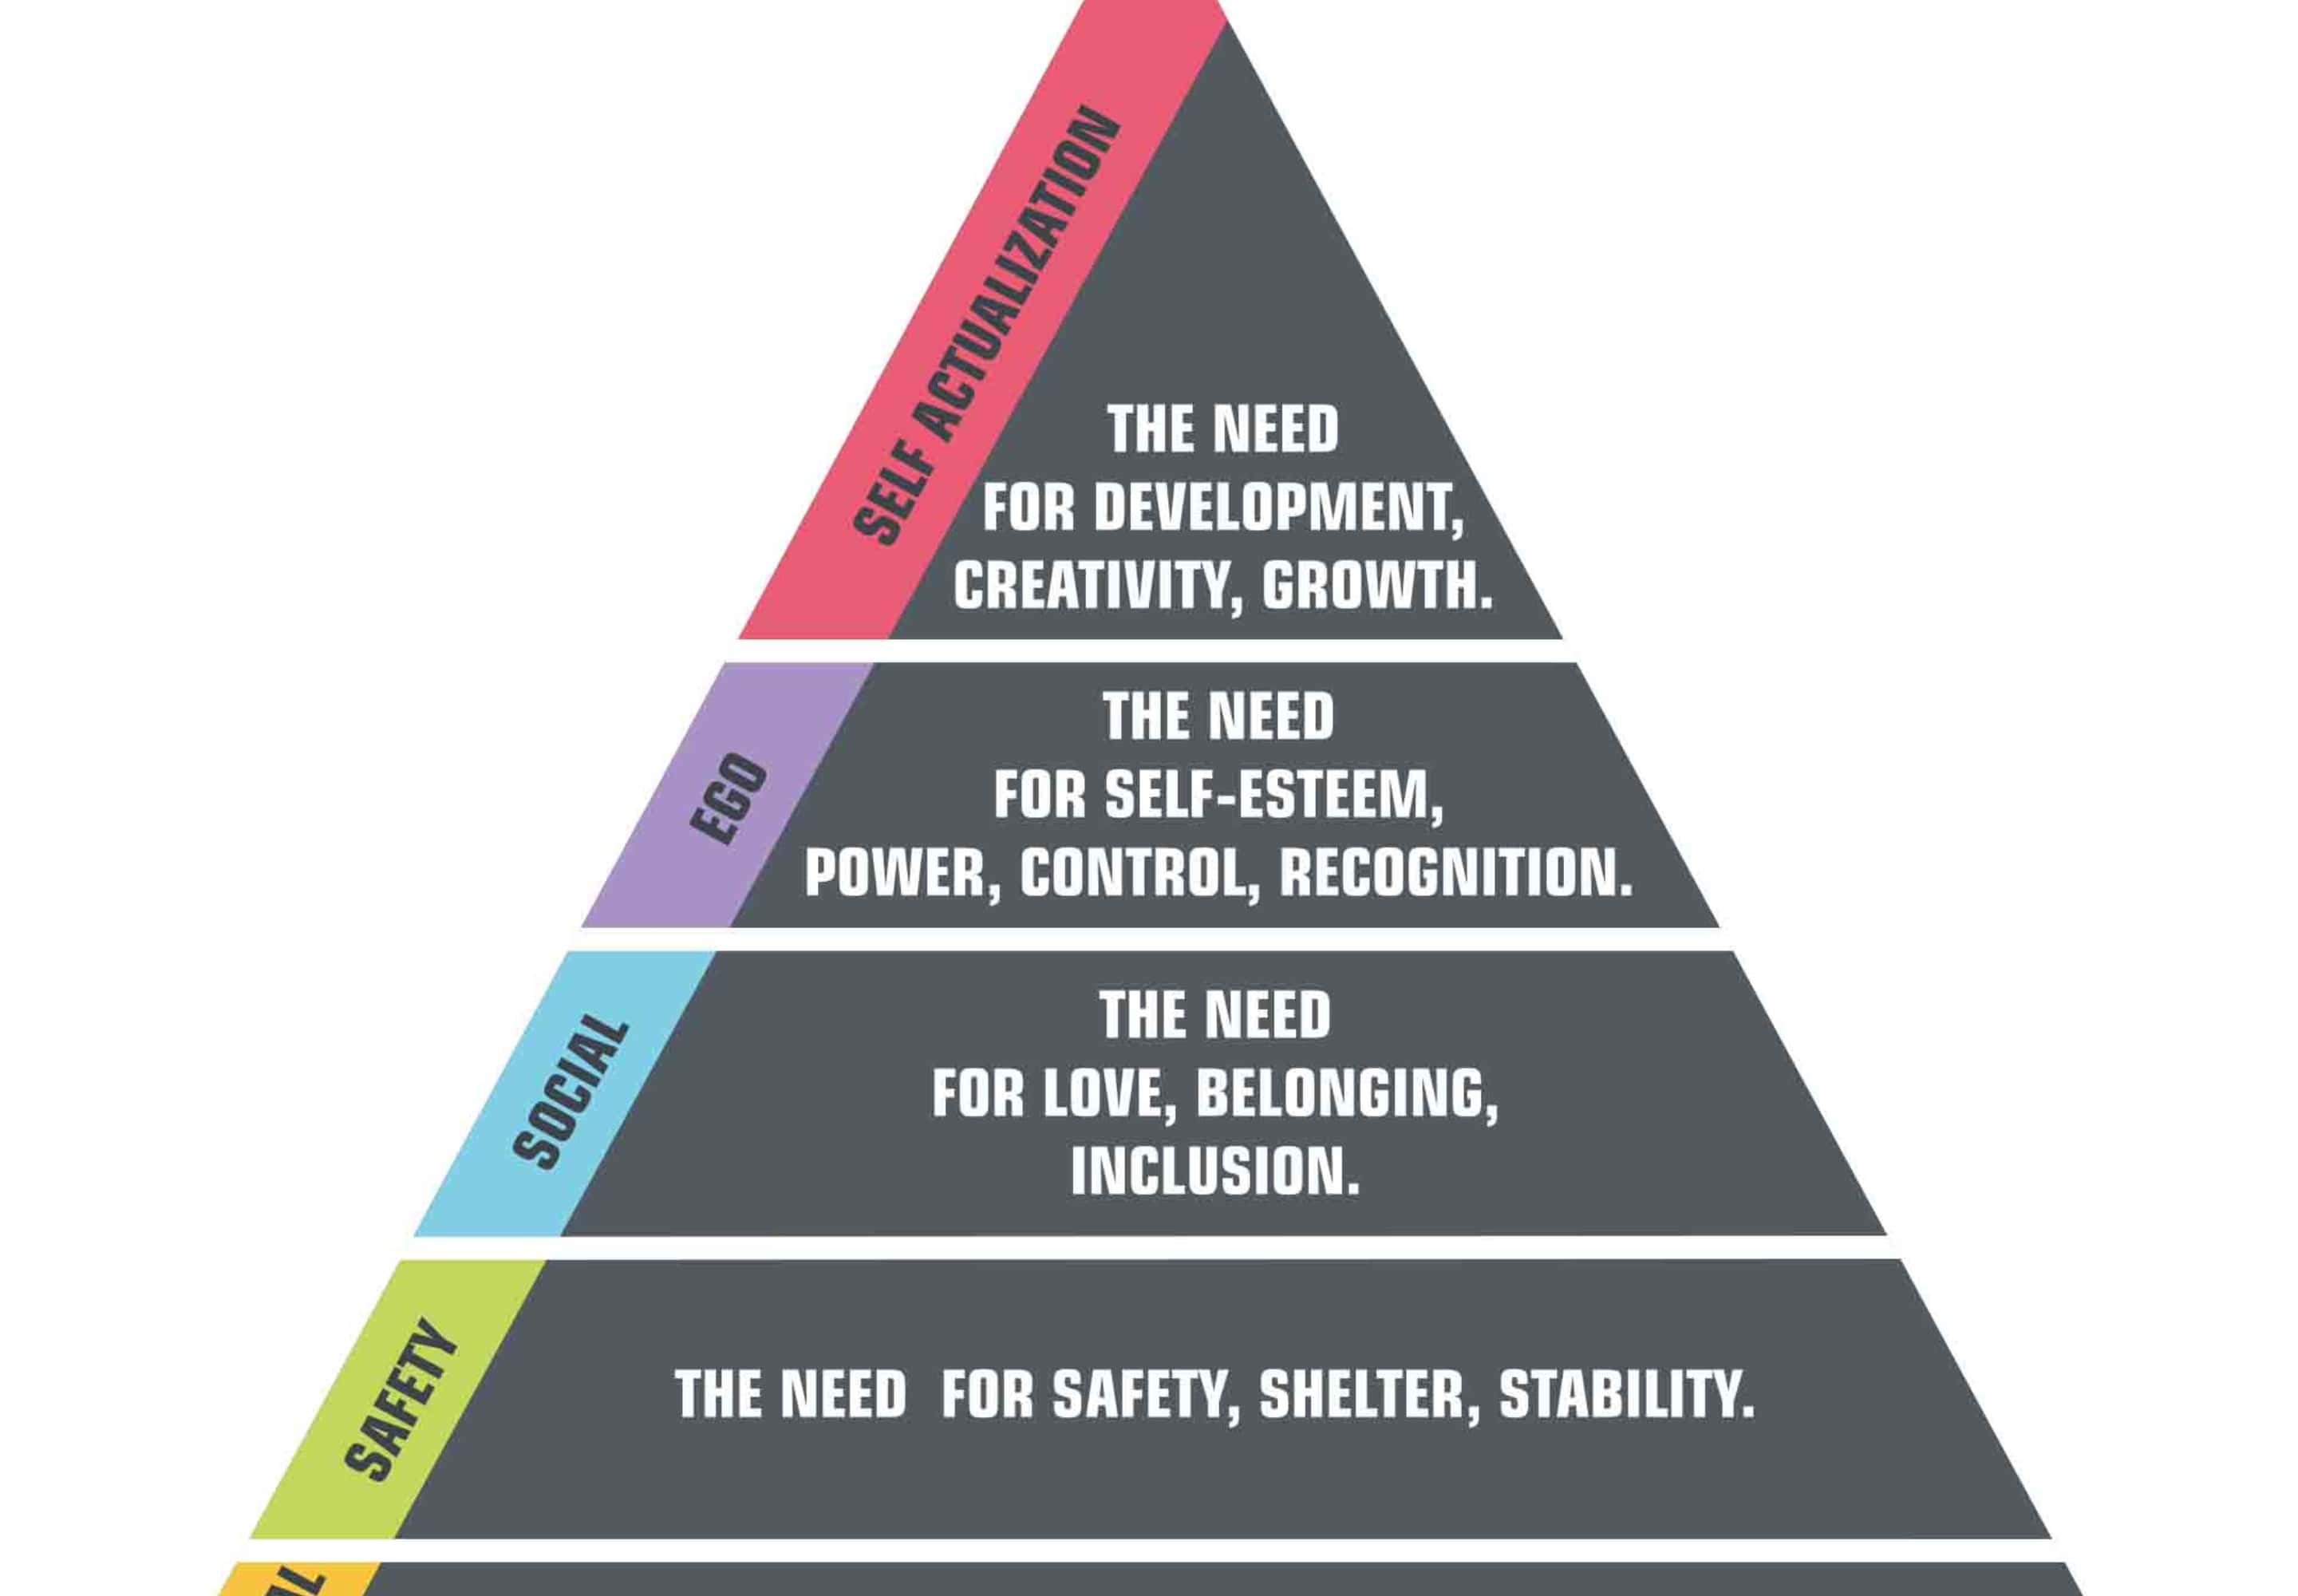 Maslows Hierarchy of Needs infographic